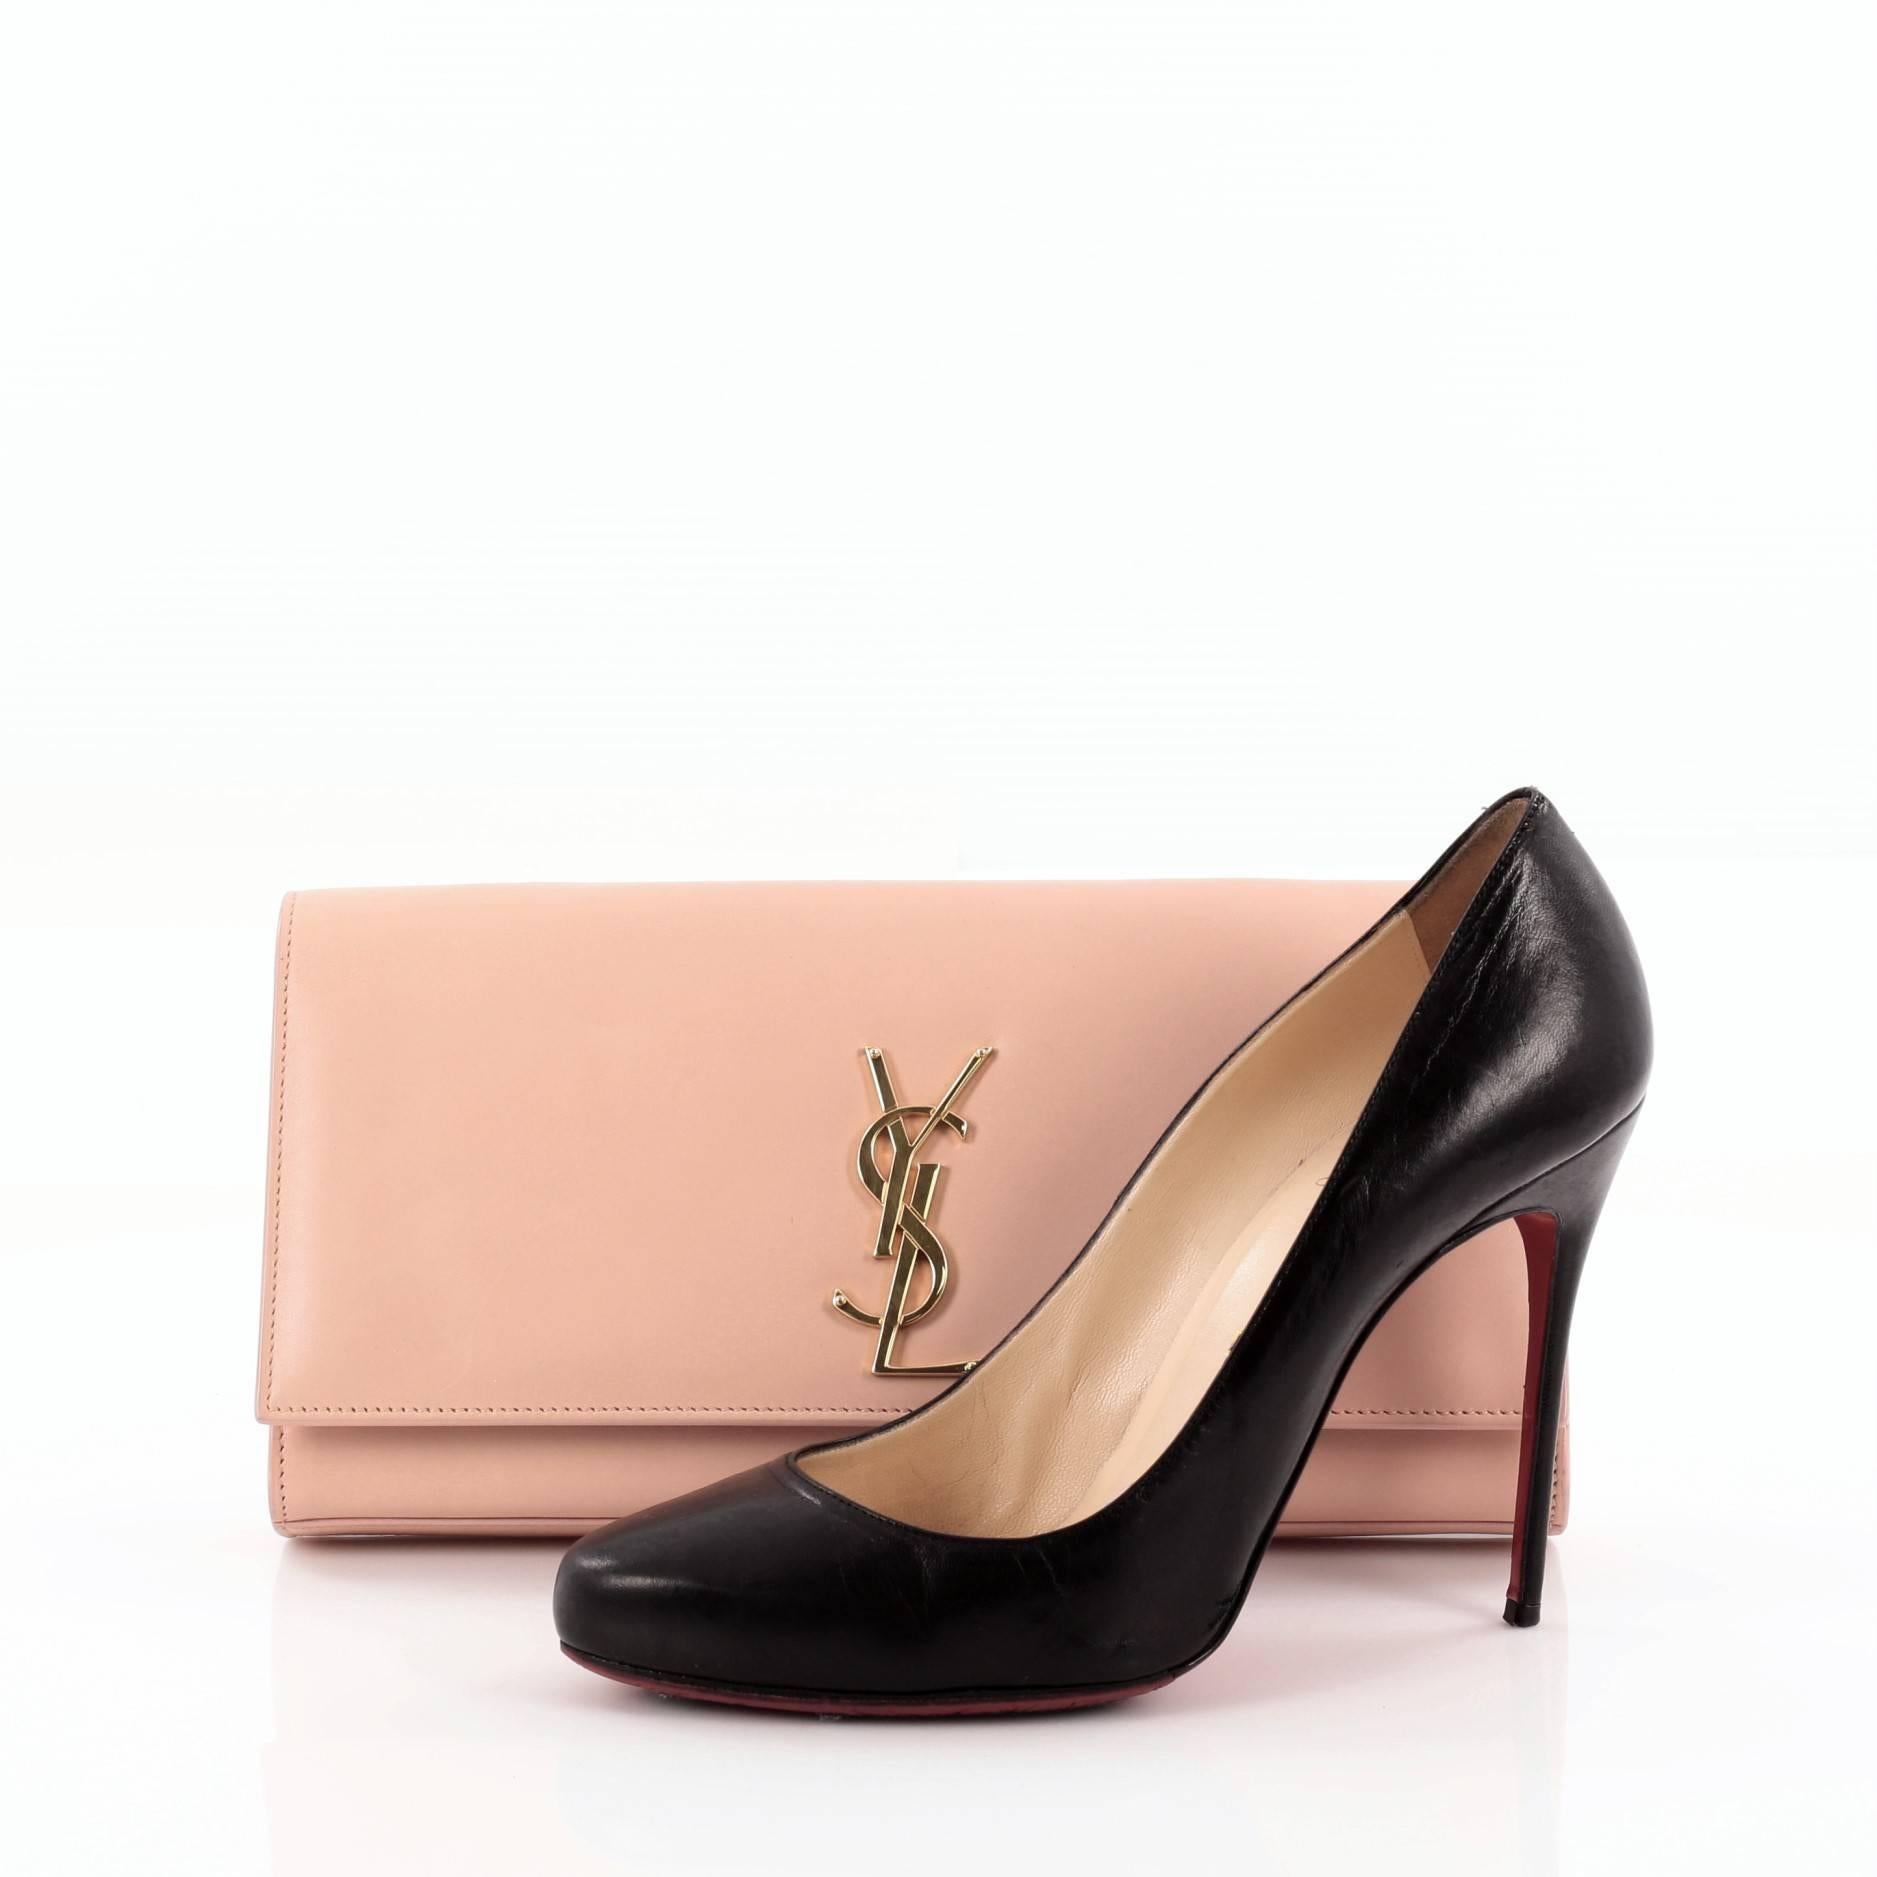 This authentic Saint Laurent Classic Monogram Clutch Leather Medium adds a touch of glamour to everyday looks. Crafted in pale pink leather, this elegant clutch features an iconic gold YSL monogram logo on its flap and gold-tone hardware accents.